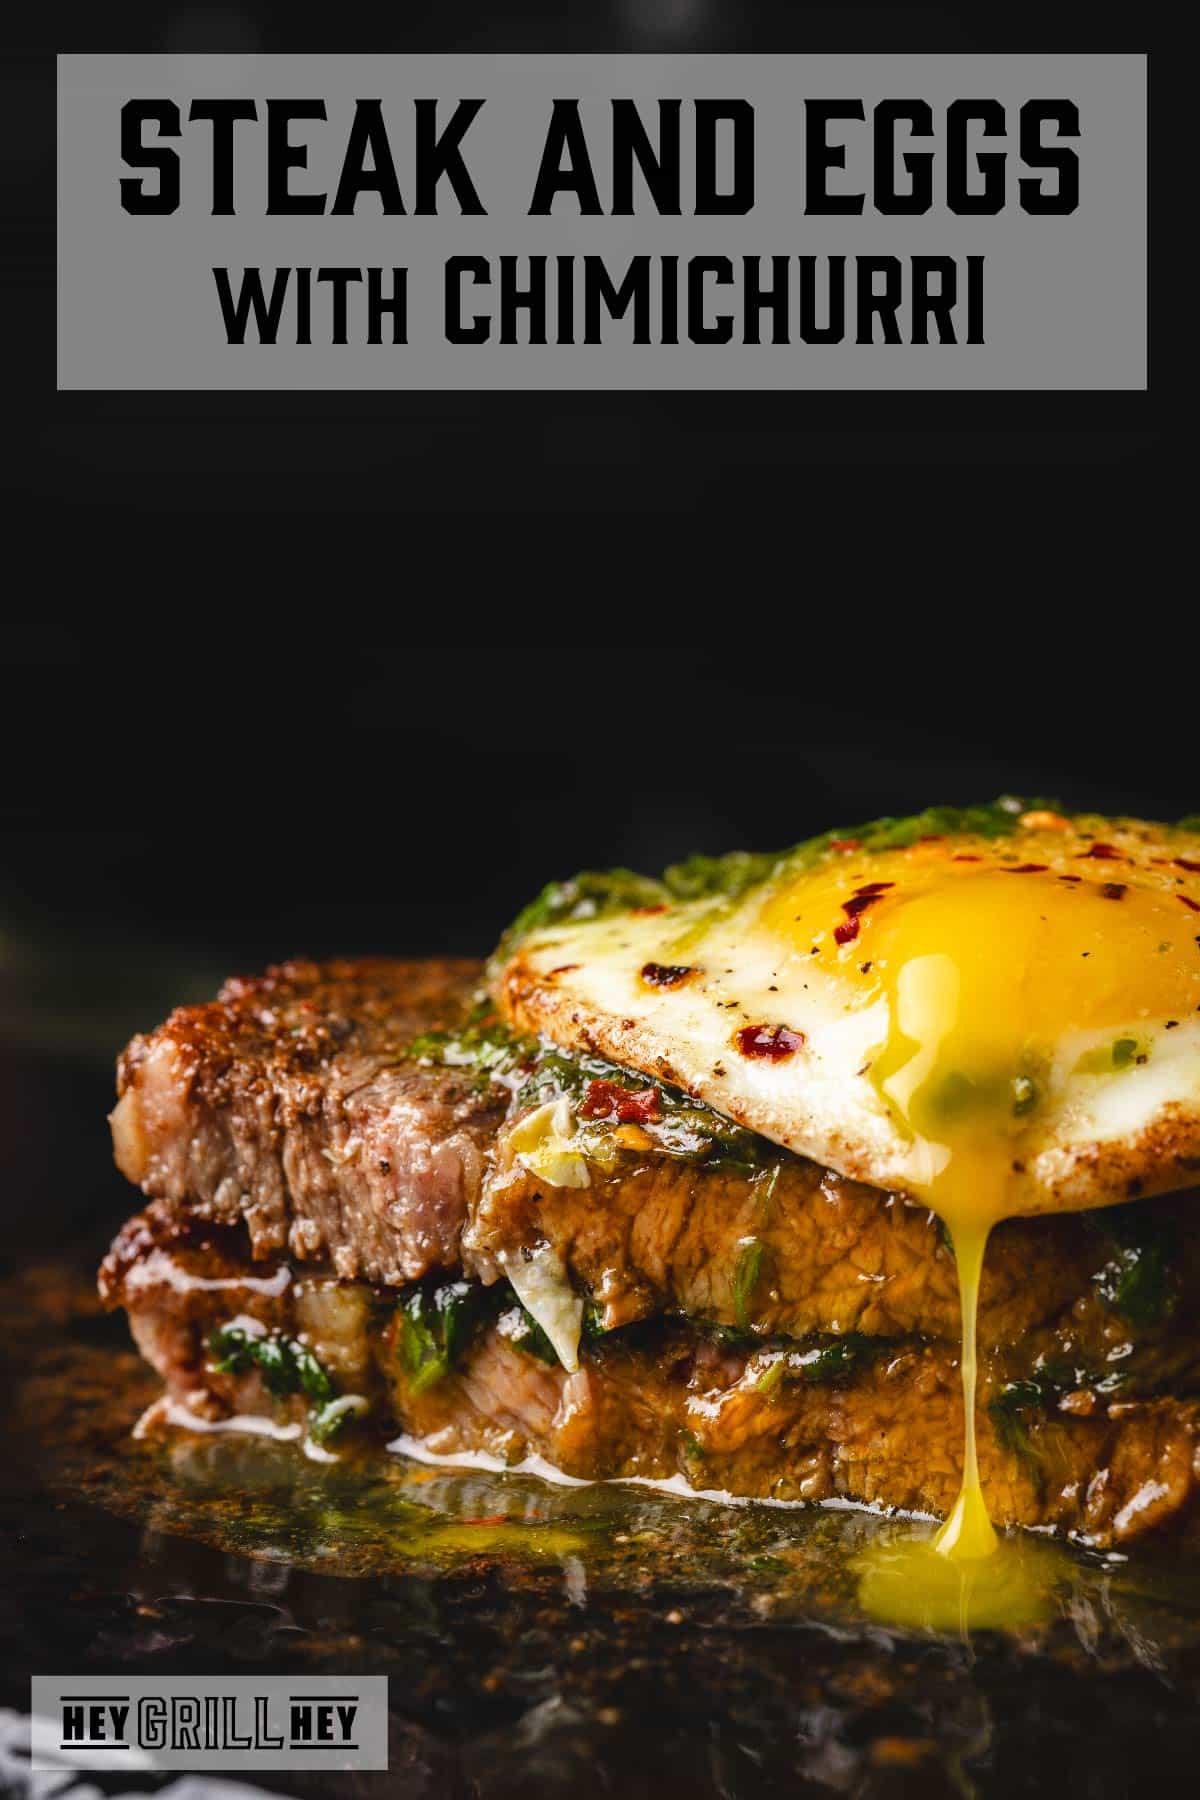 Seared steak with fried egg on top. Text reads "Steak and Eggs with Chimichurri".